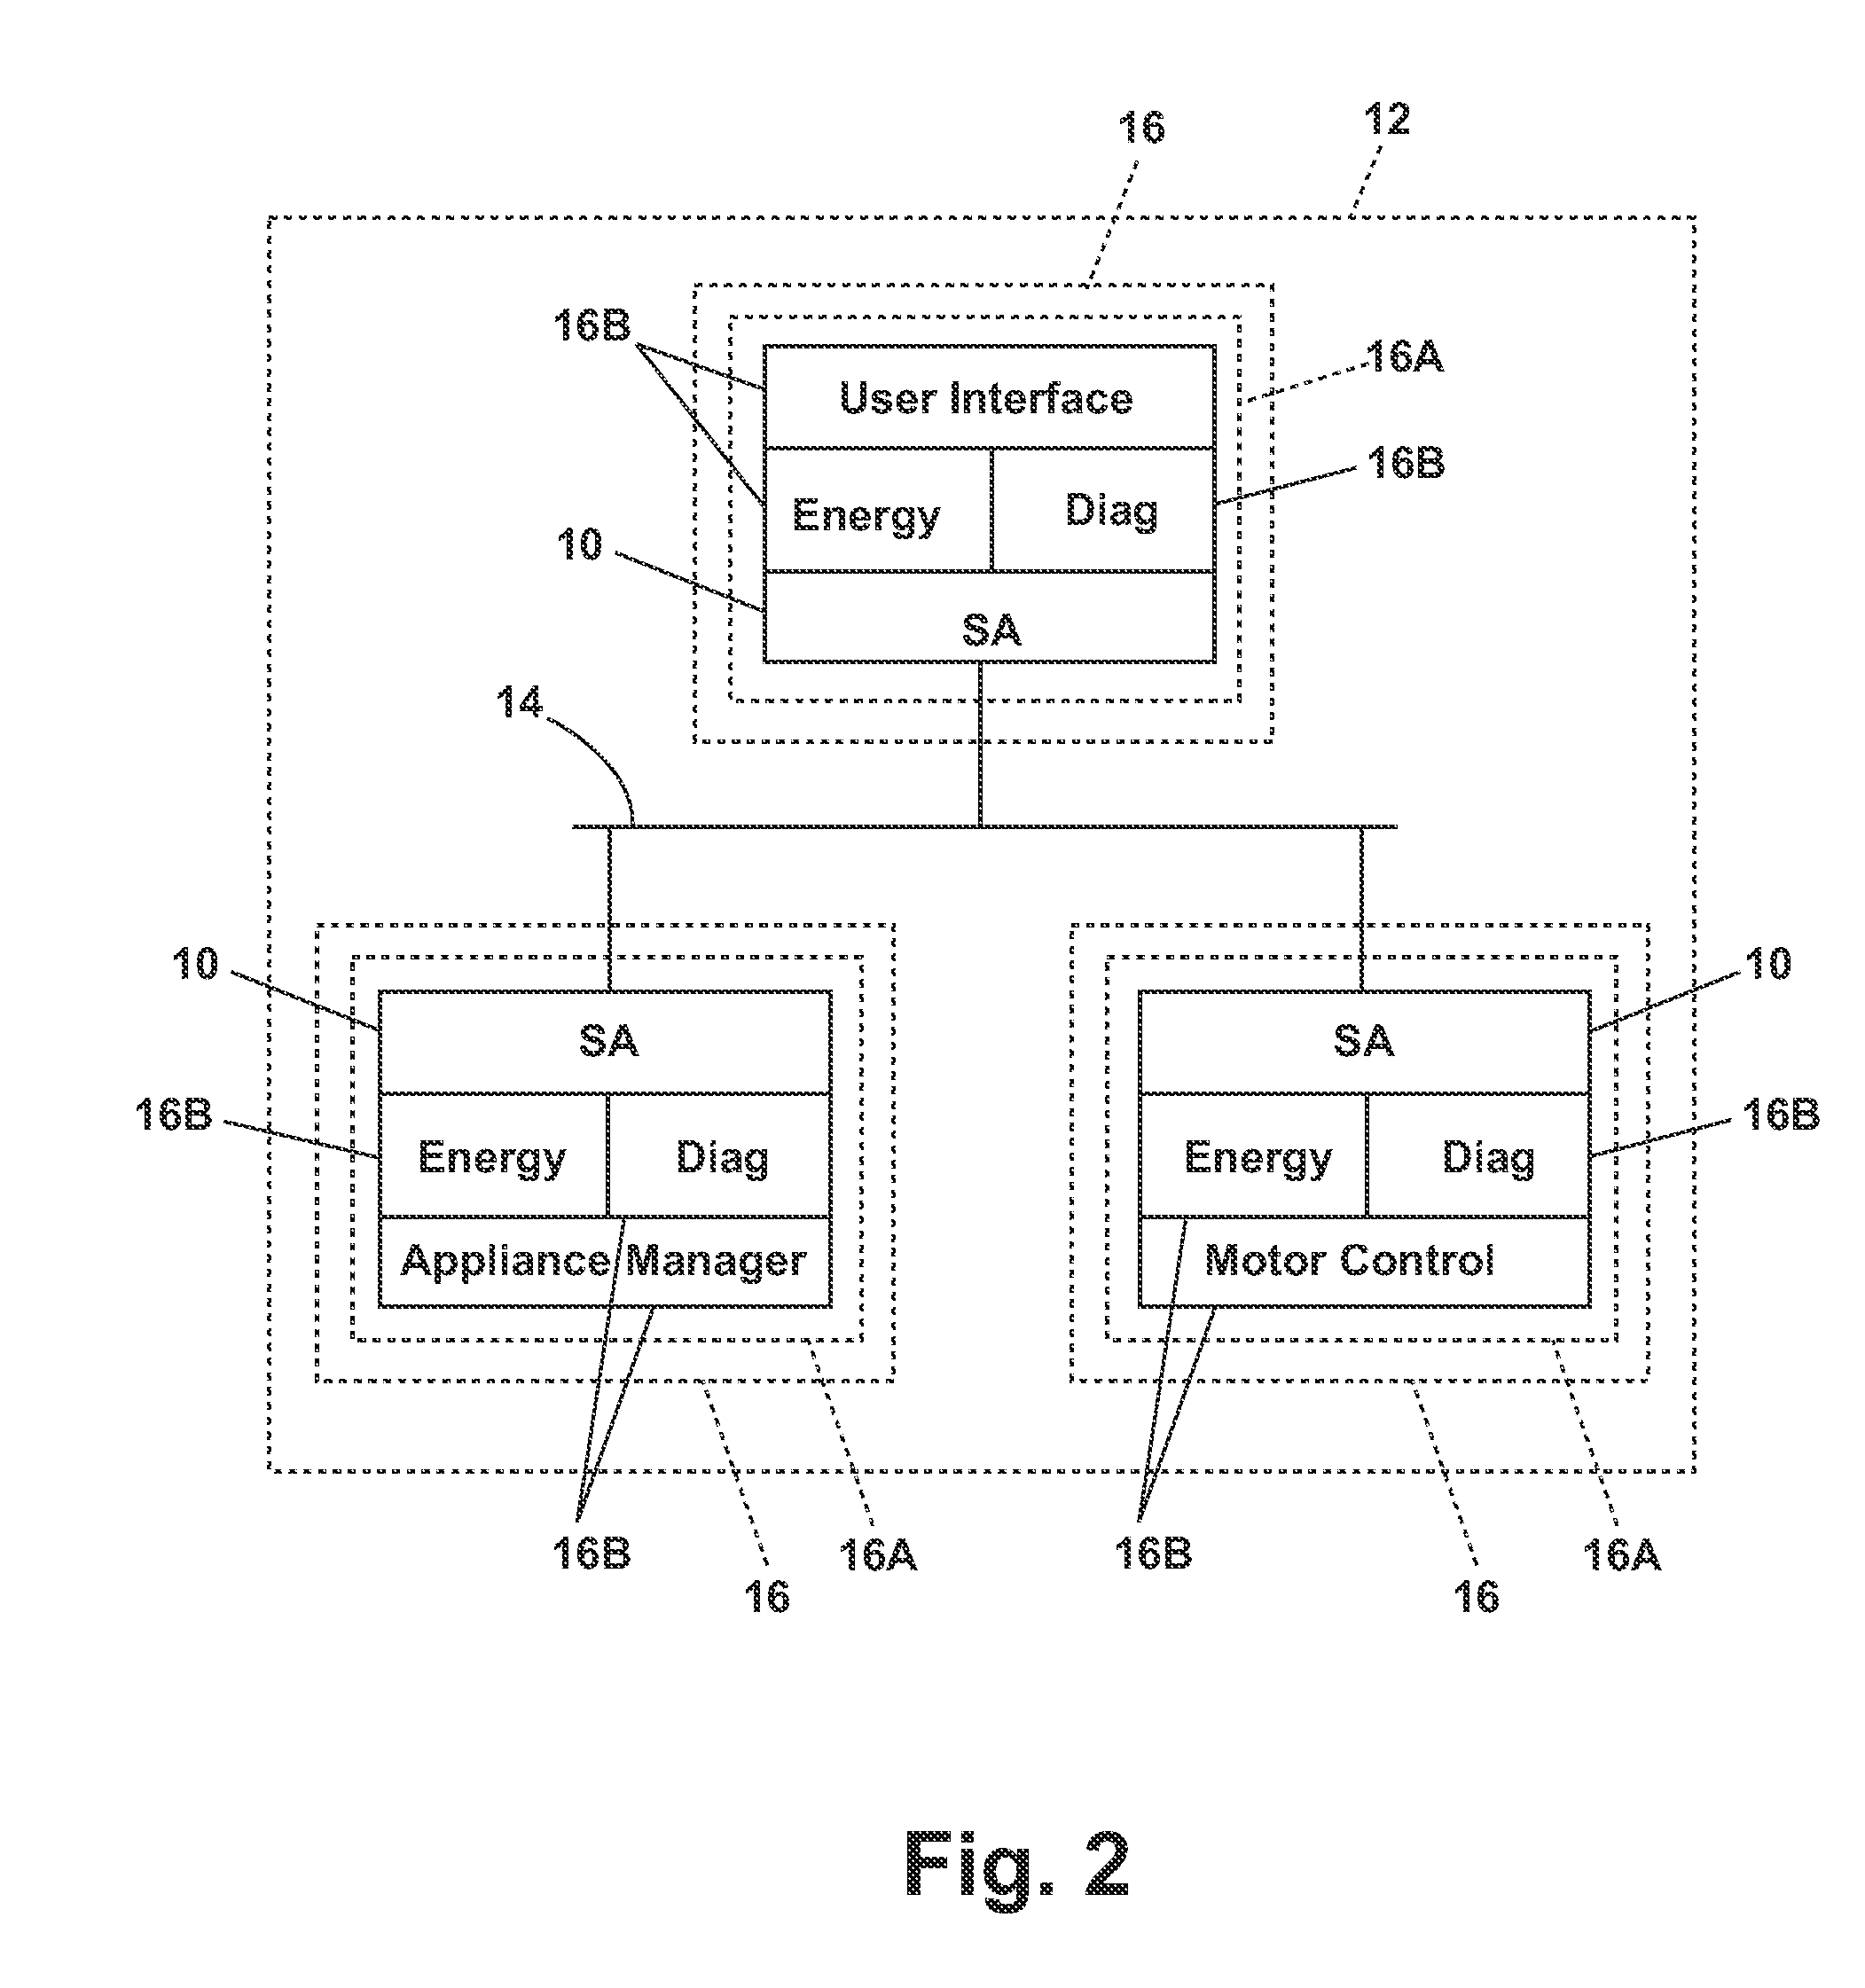 Software architecture system and method for operating an appliance utilizing configurable notification messages